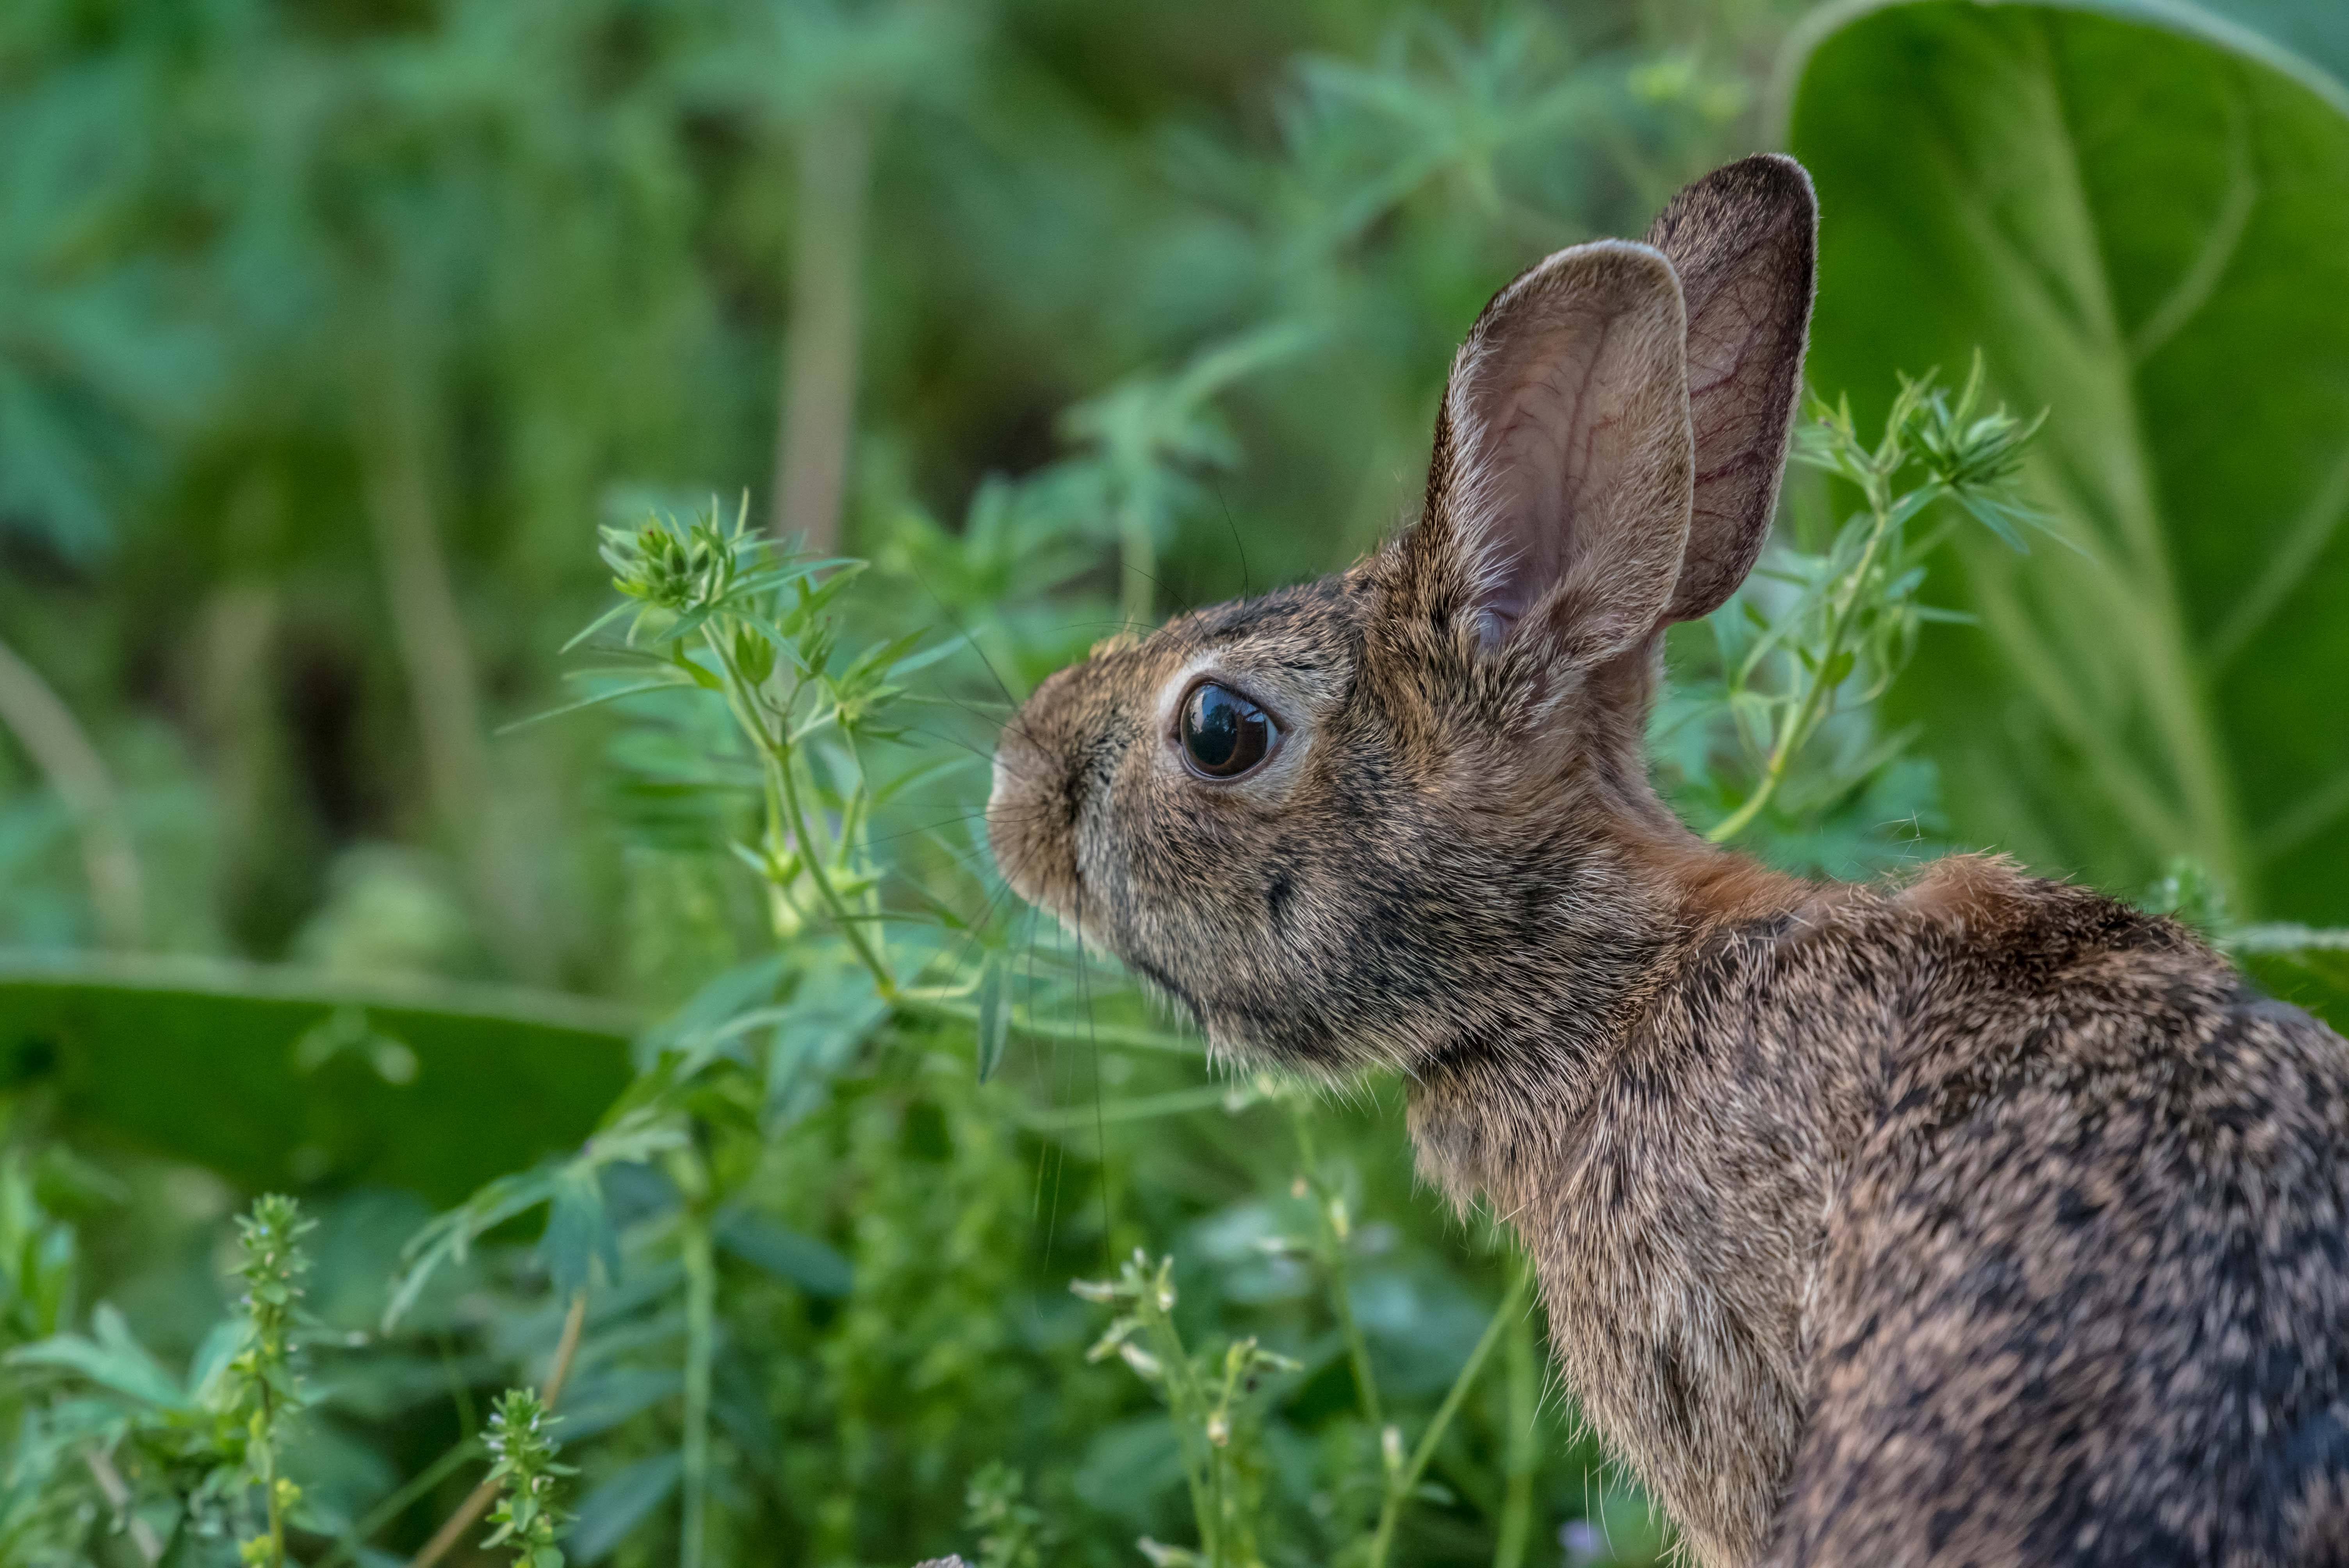 How to Protect Plants from Rabbits The Best Way to Keep Rabbits out of the Garden